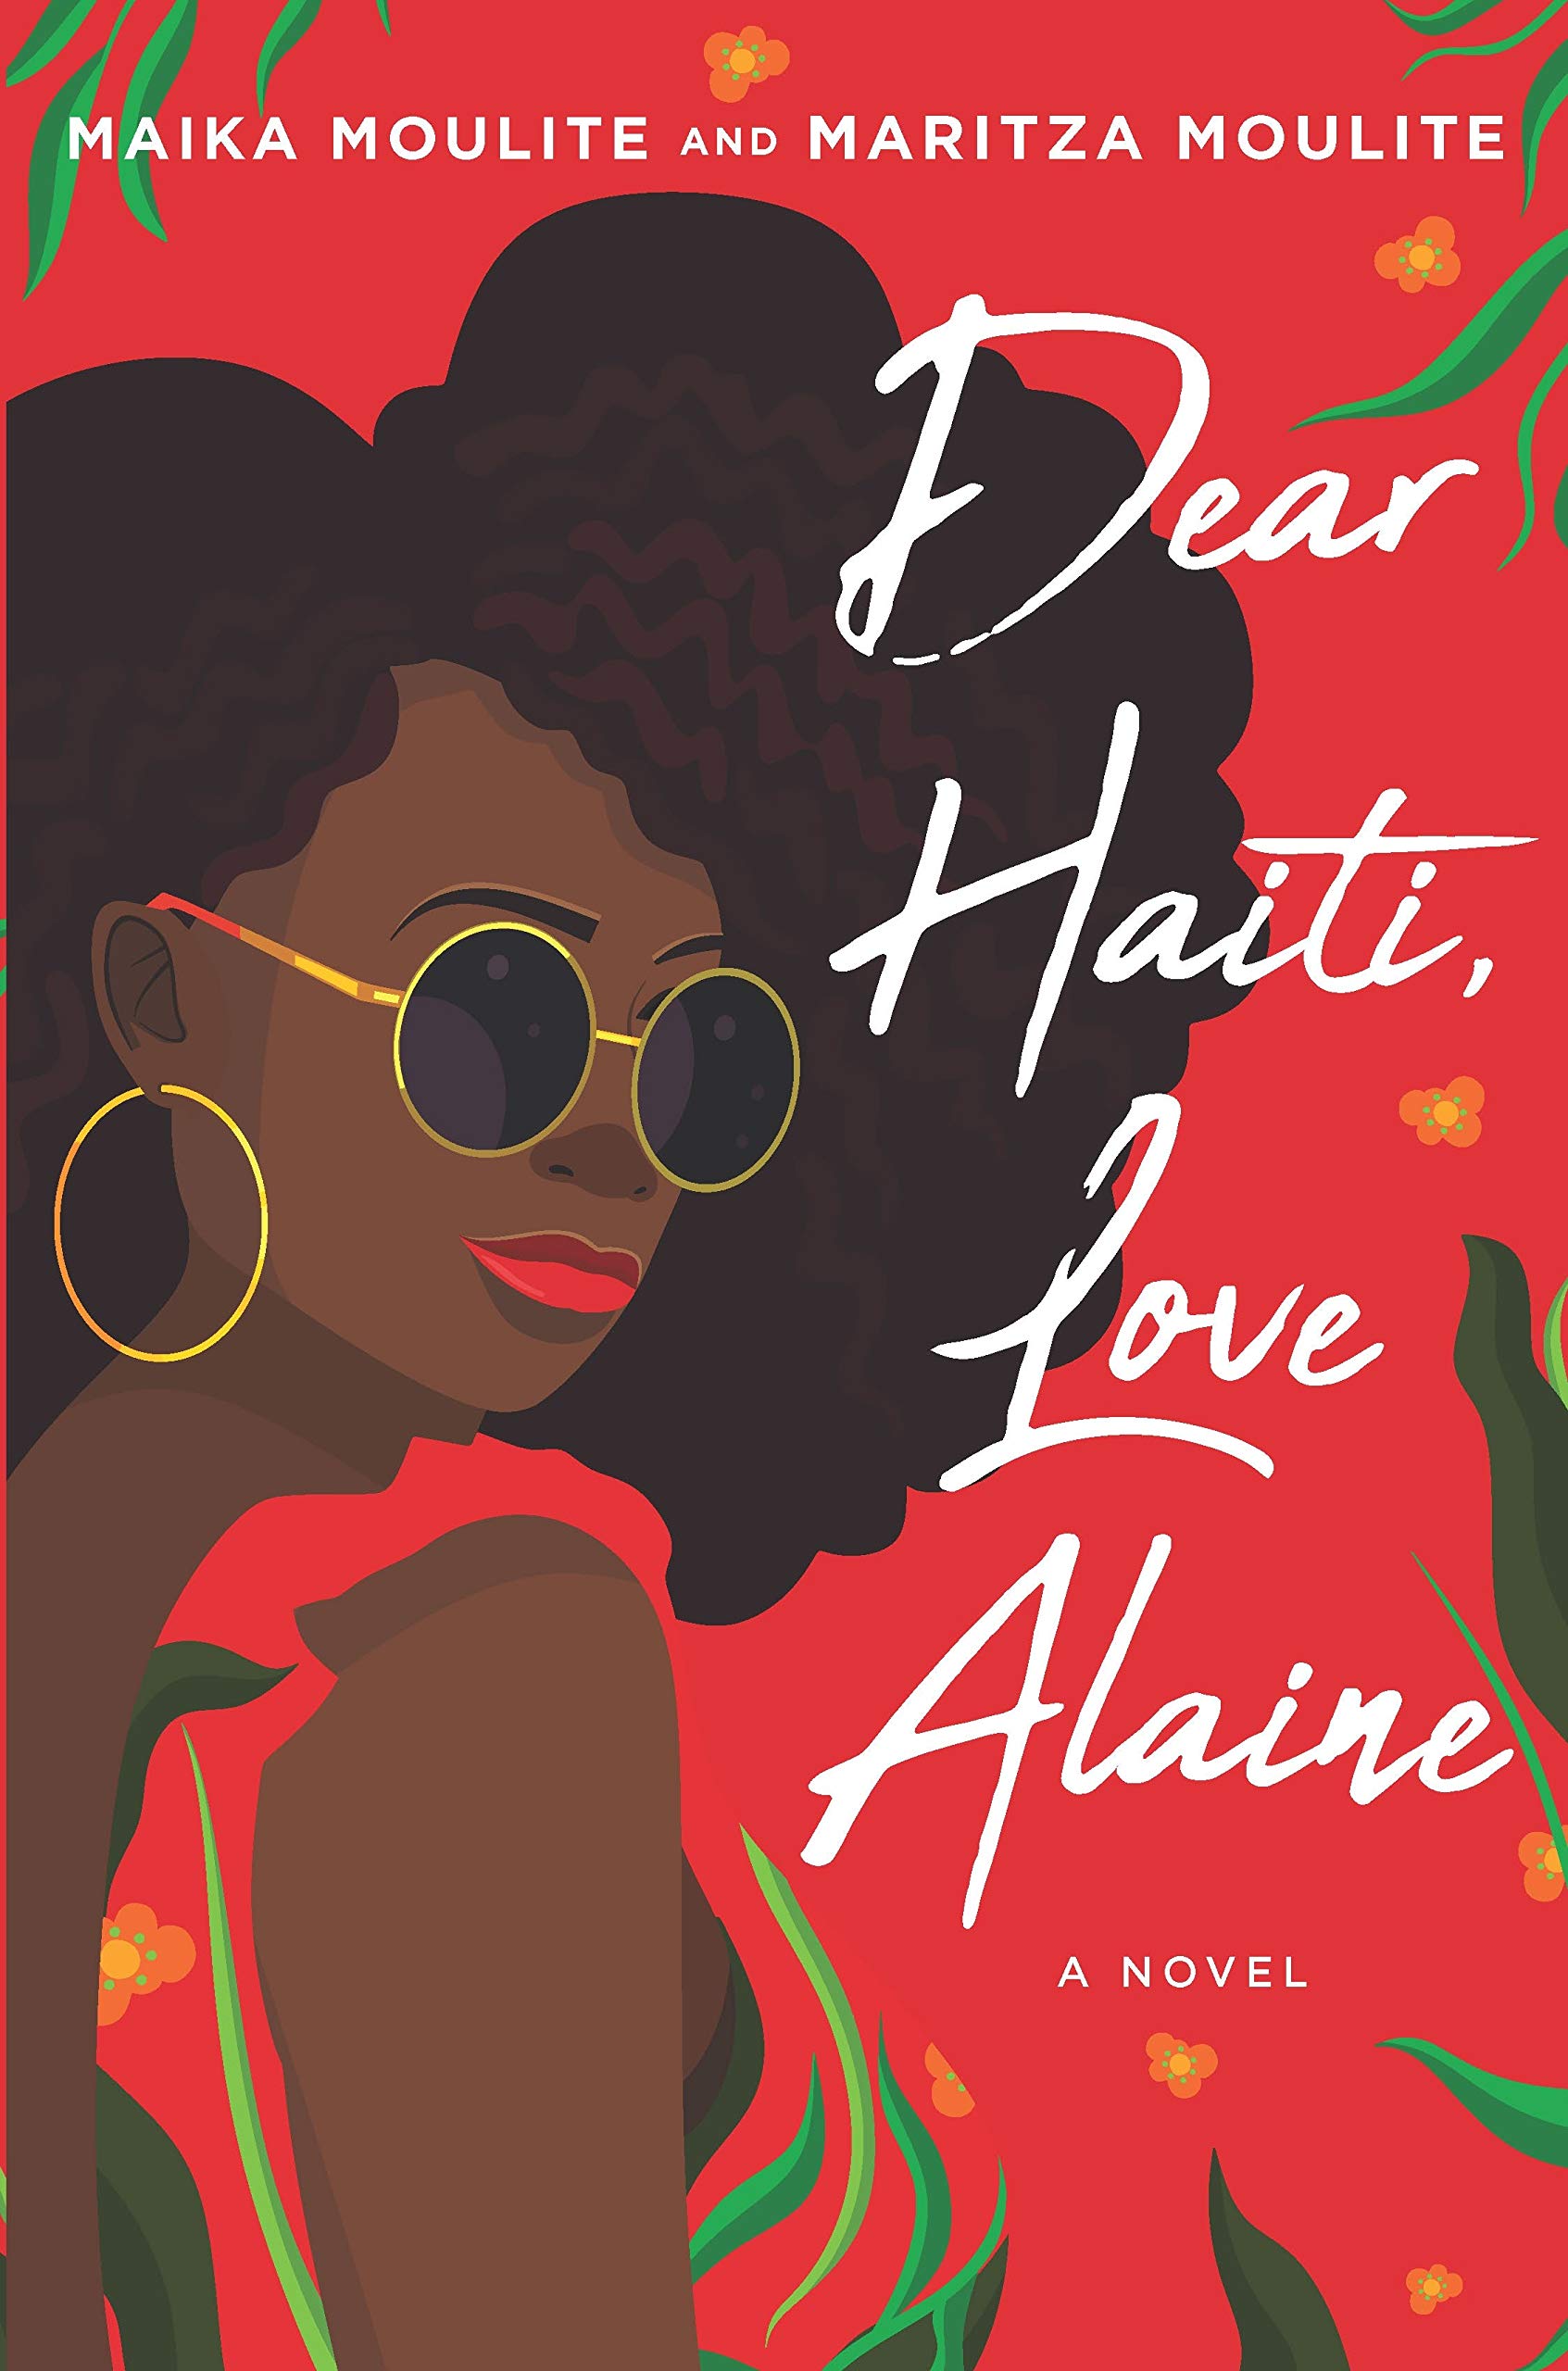 The book cover of "Dear Haiti, Love Alaine" by Maika Moulite & Maritza Moulite. It features a cartoon drawing of a woman on the left hand side, looking over her shoulder. On the right there are tropical plant leaves. 